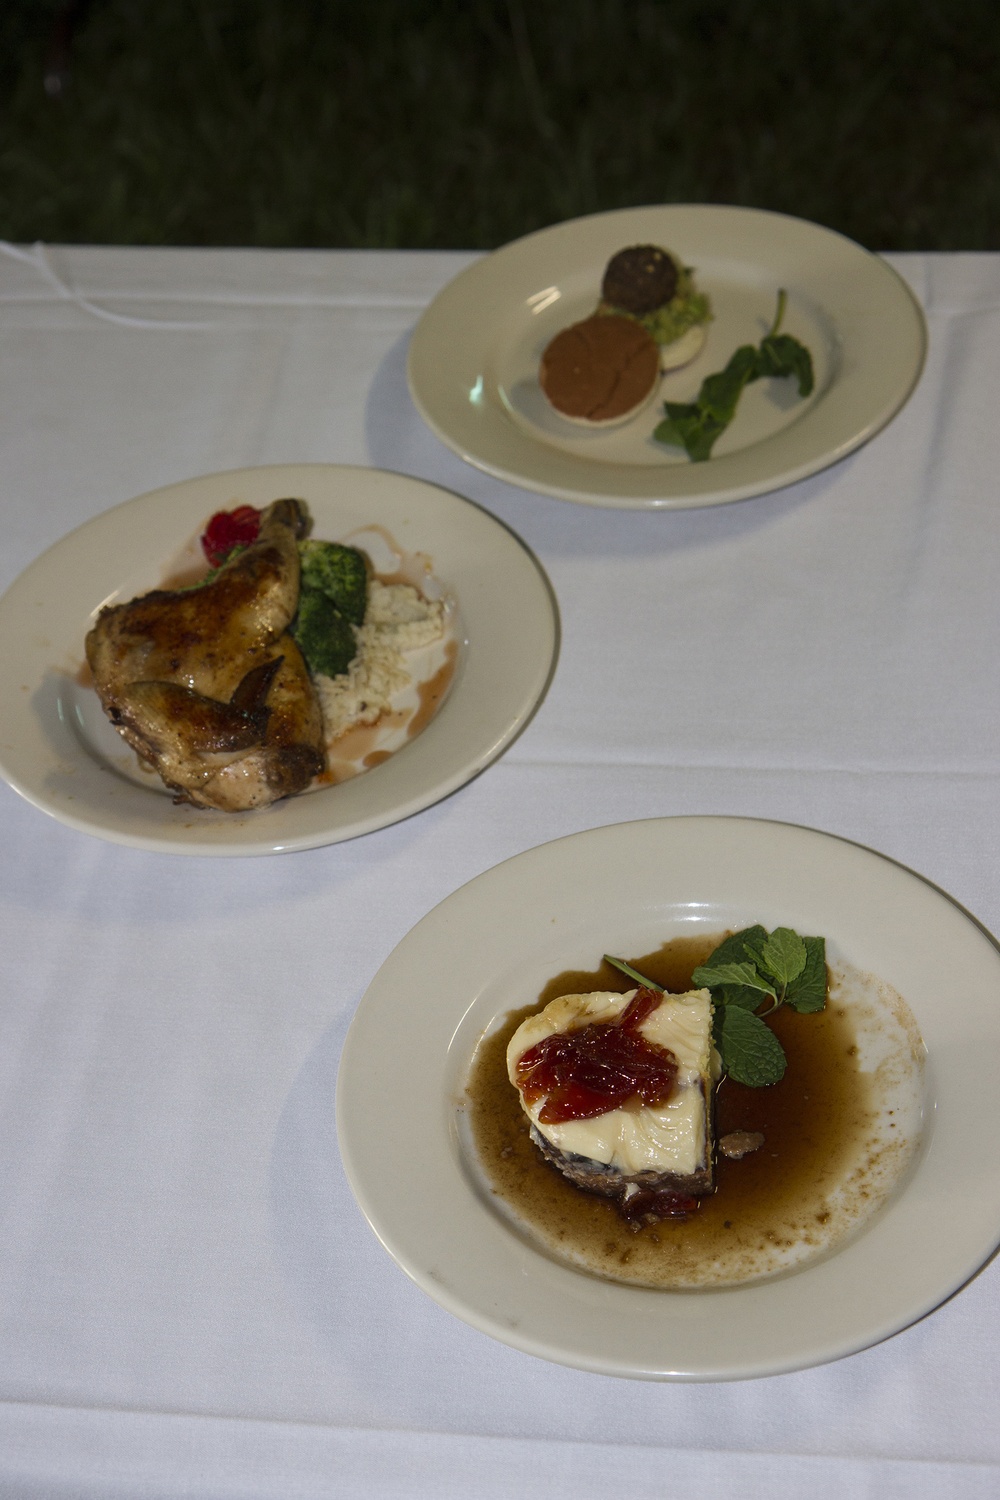 3rd CAB rocks the Marne Air Iron Chef competition